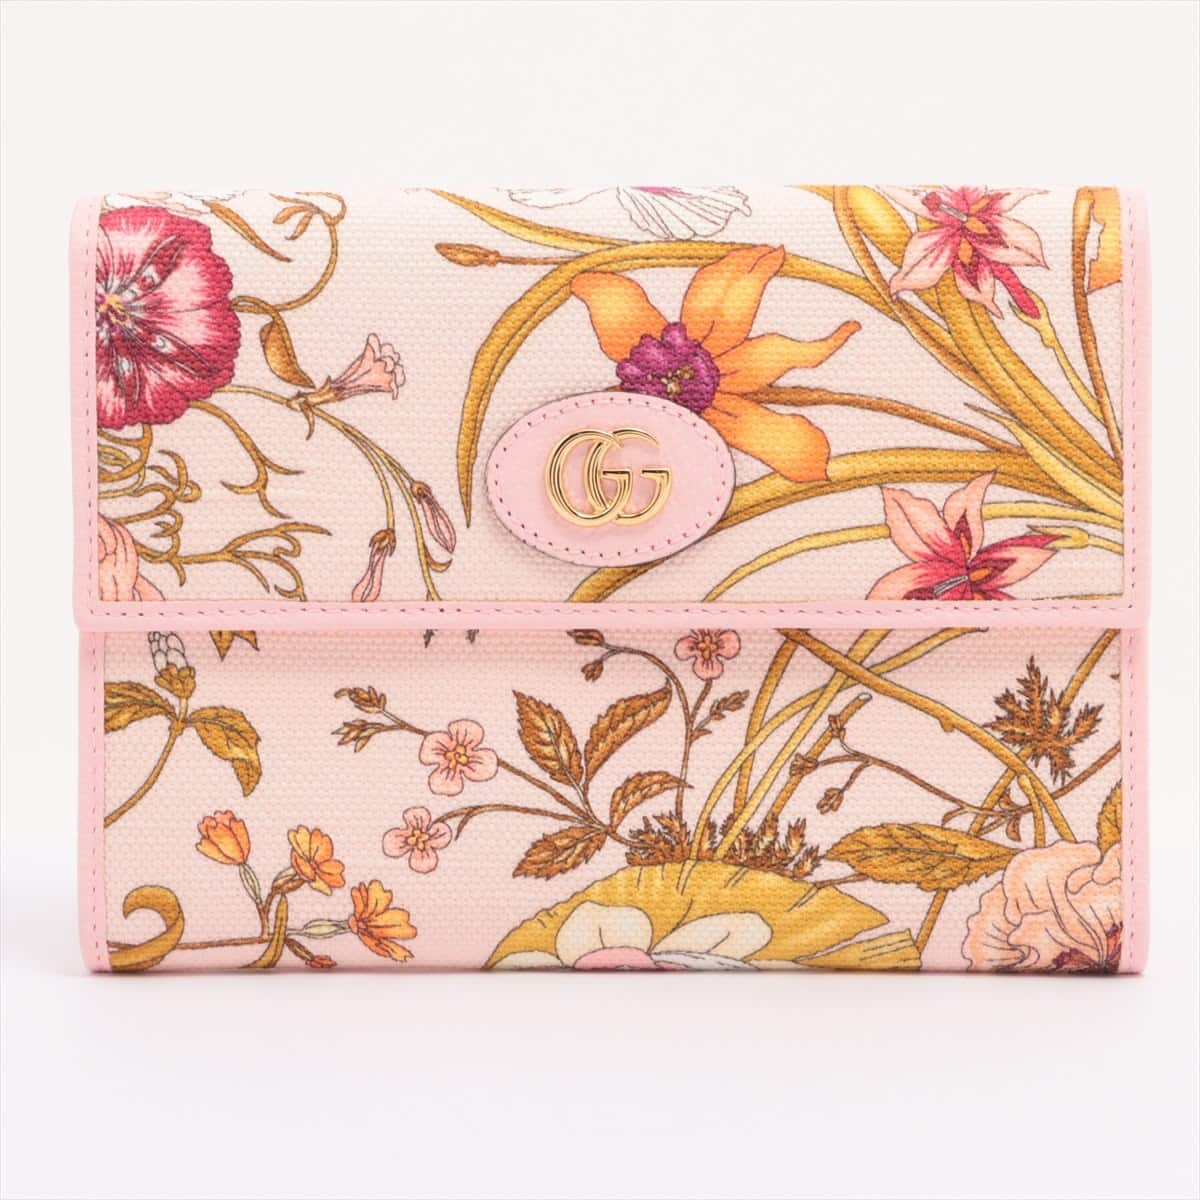 Gucci GG flora 577350 Canvas & leather Pouch Pink